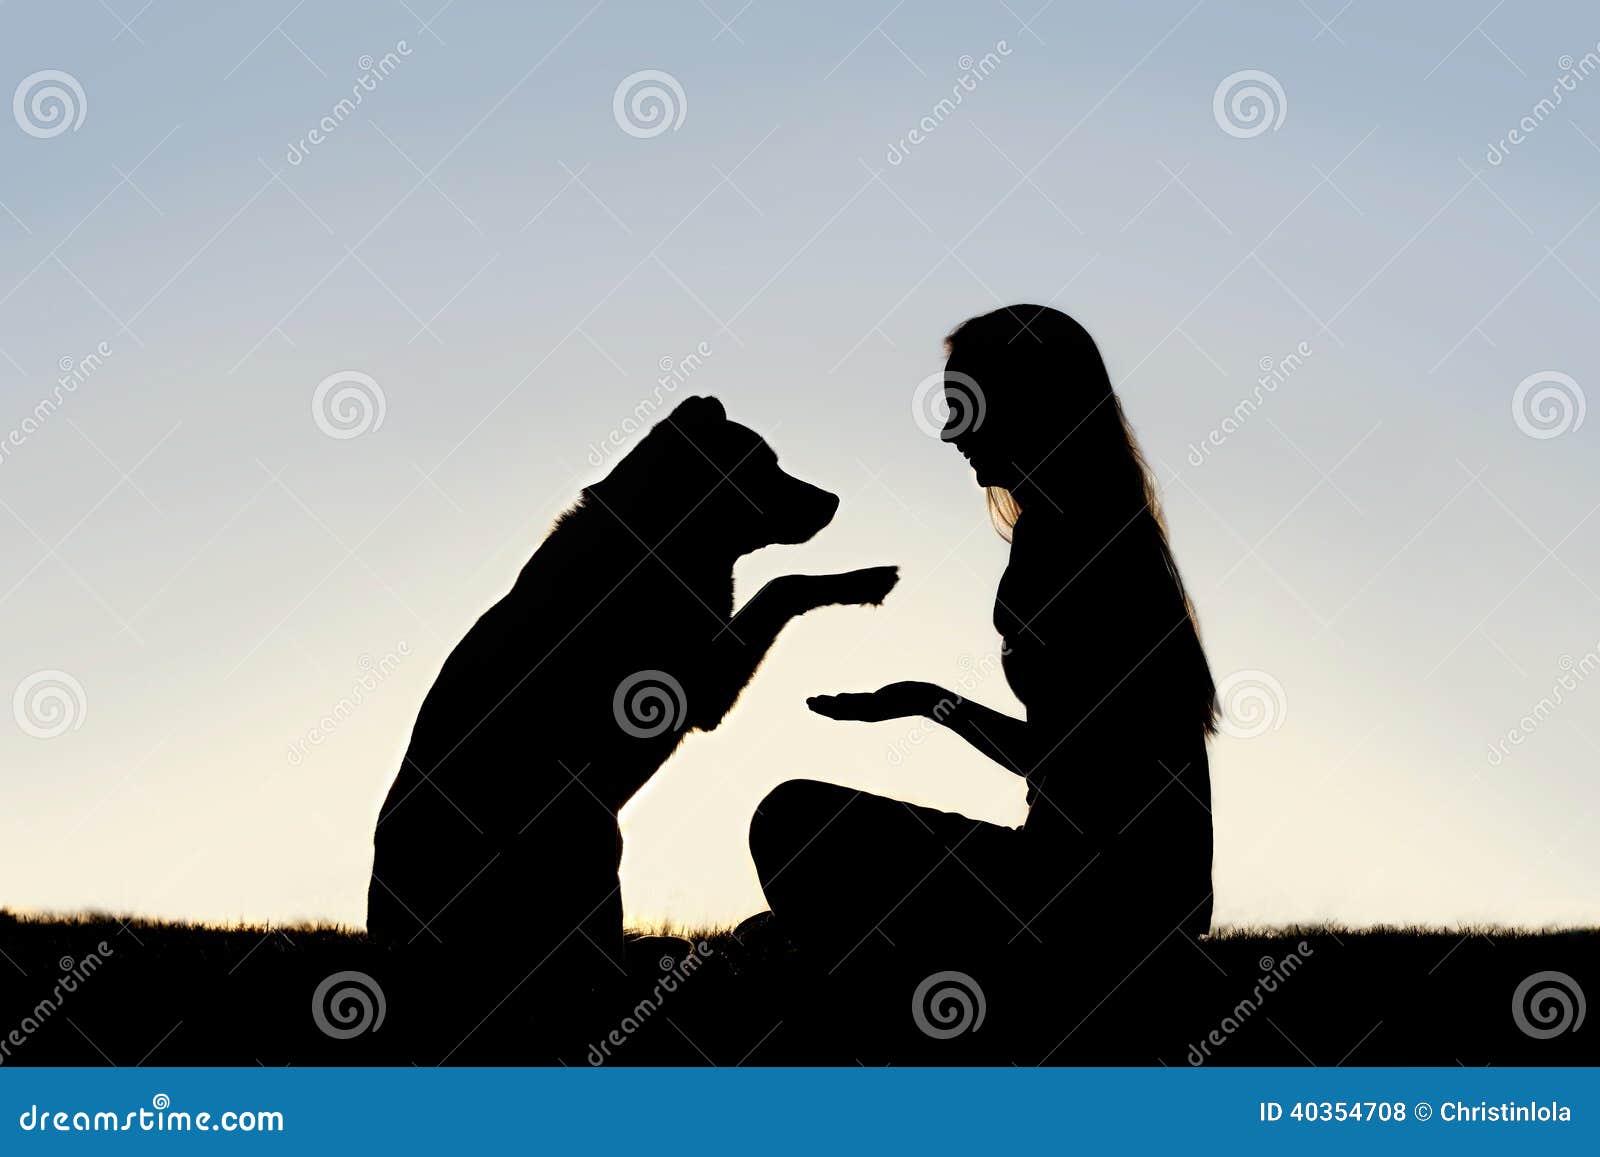 woman and her pet dog outside shaking hands silhou